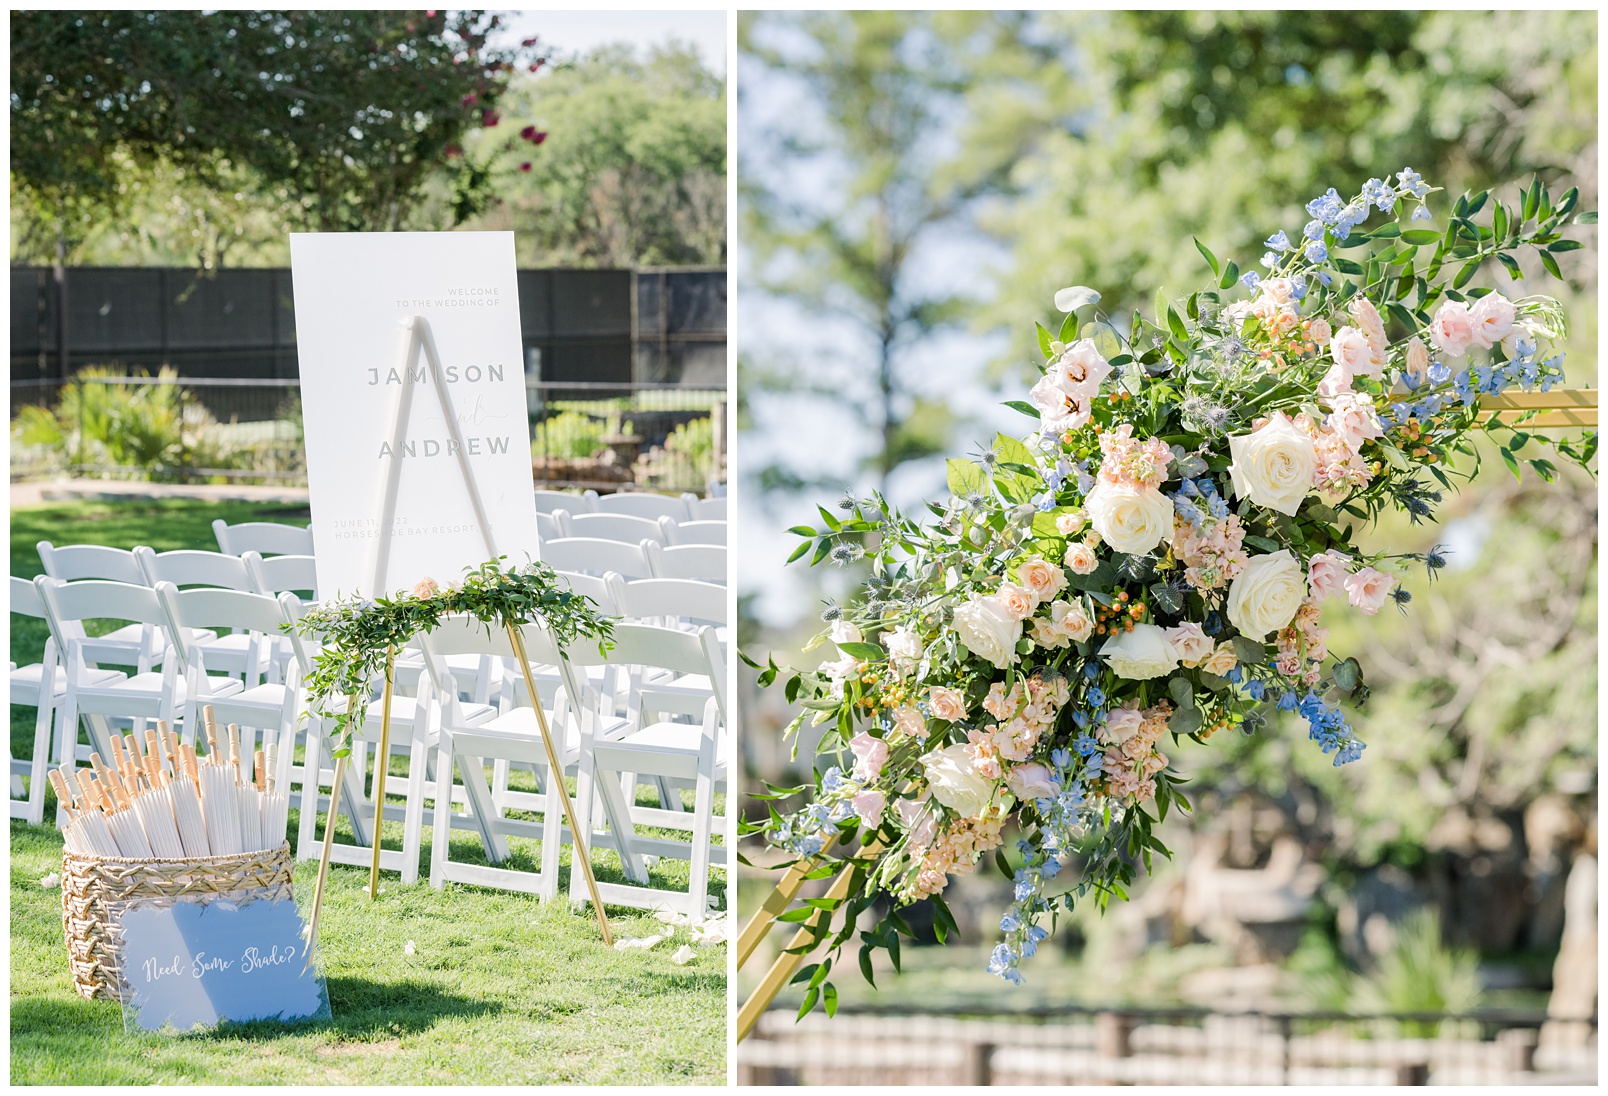 Summer Wedding Tips for guest experience: parasols